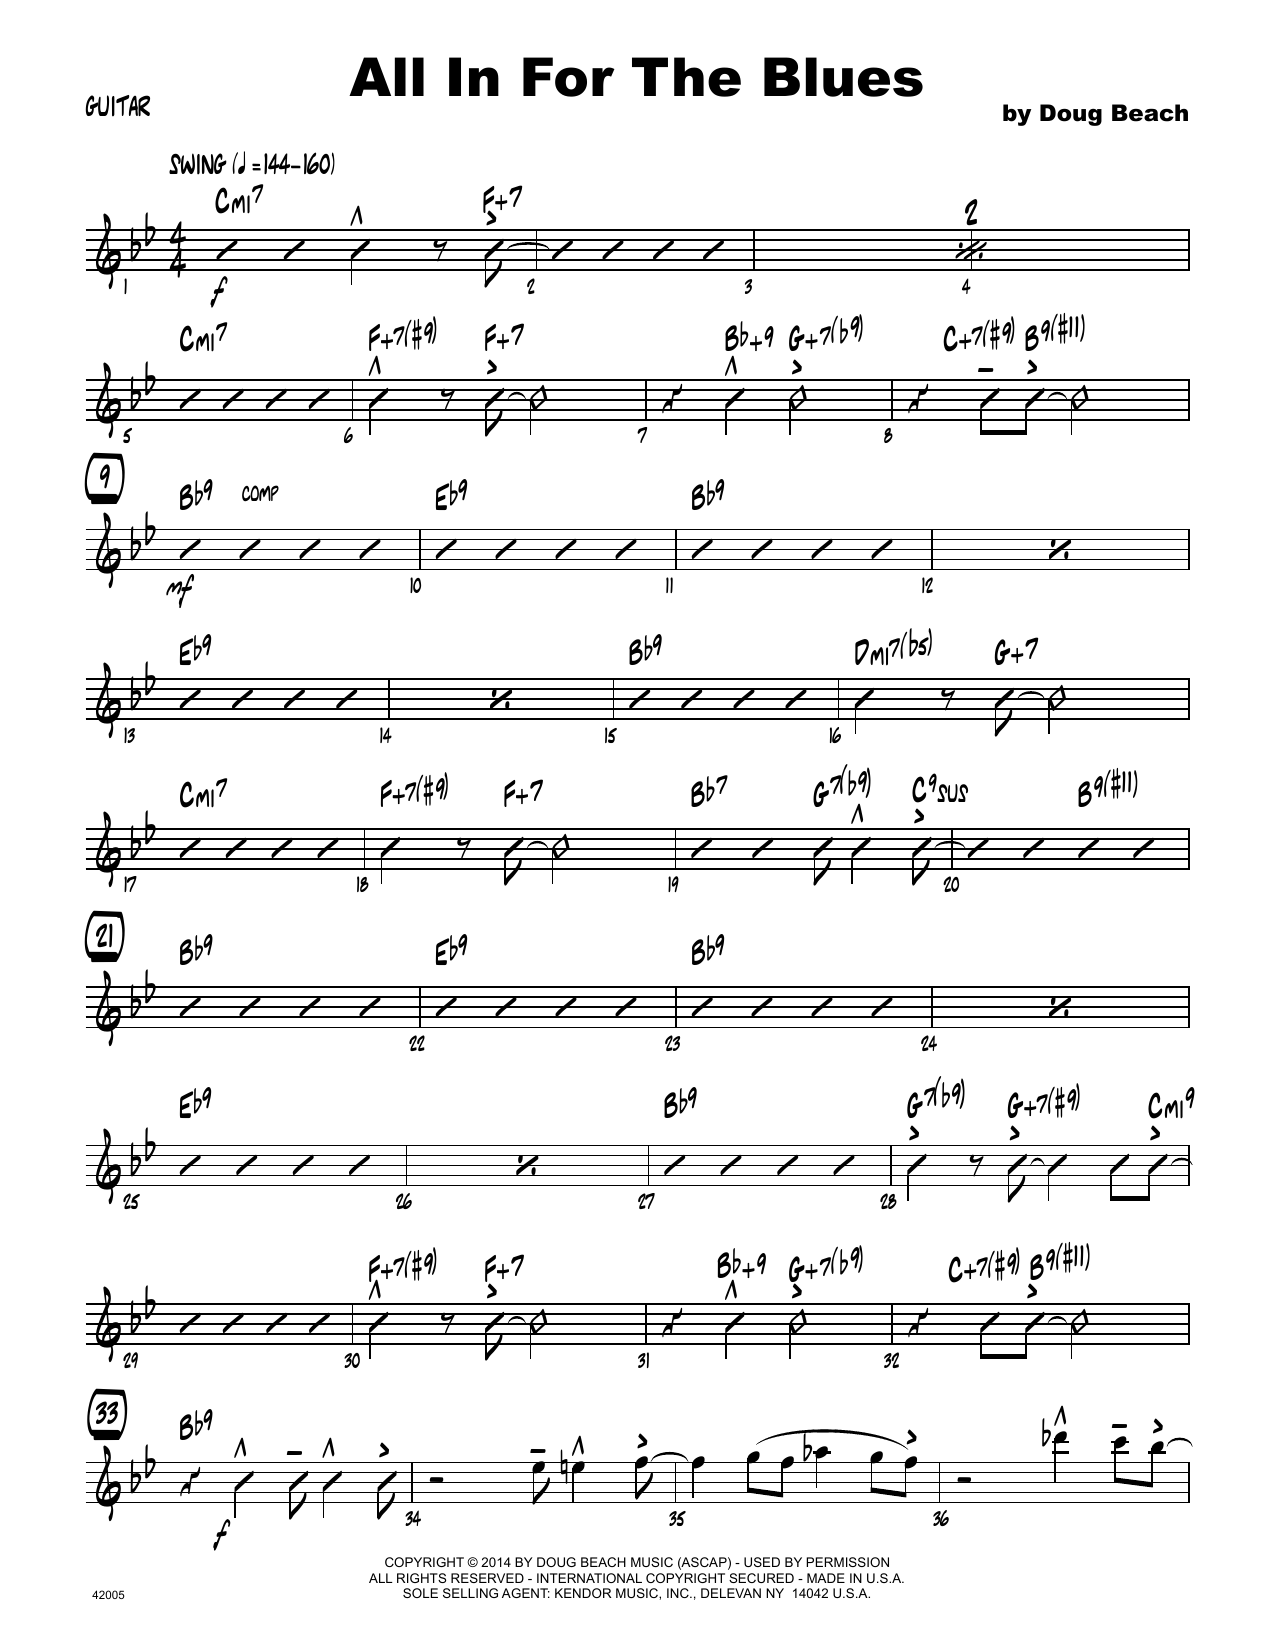 Download Doug Beach All In For The Blues - Guitar Sheet Music